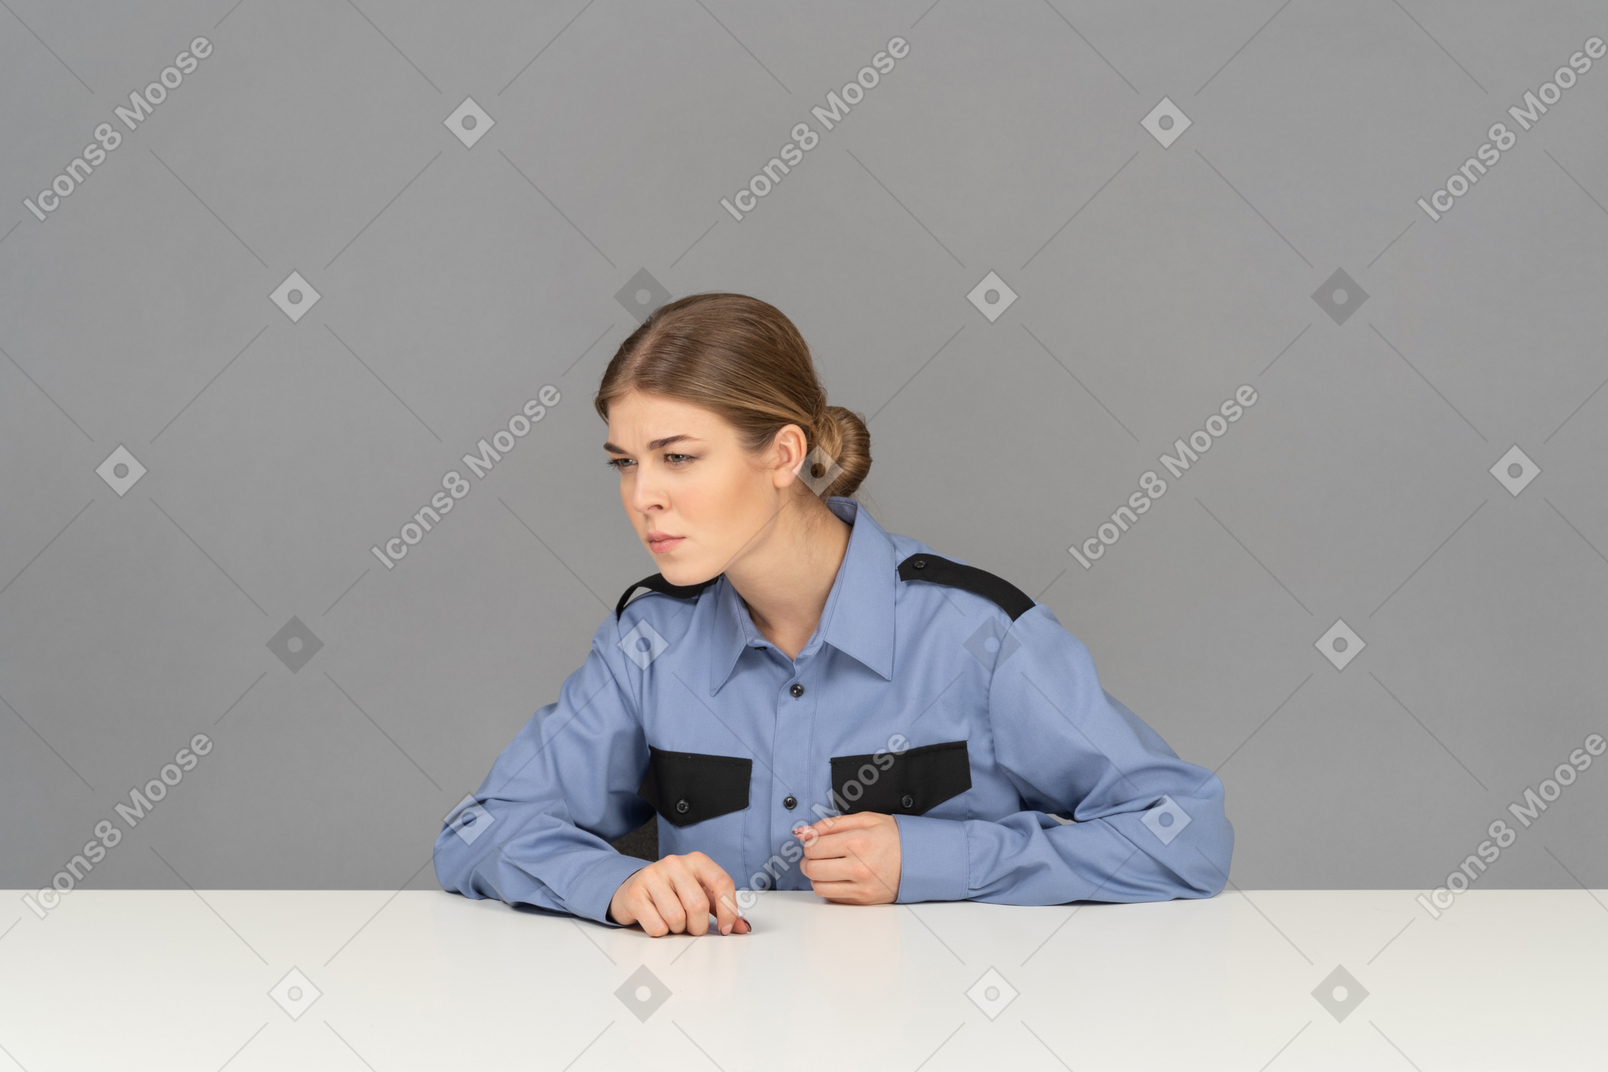 A female security guard looking sideways attentively